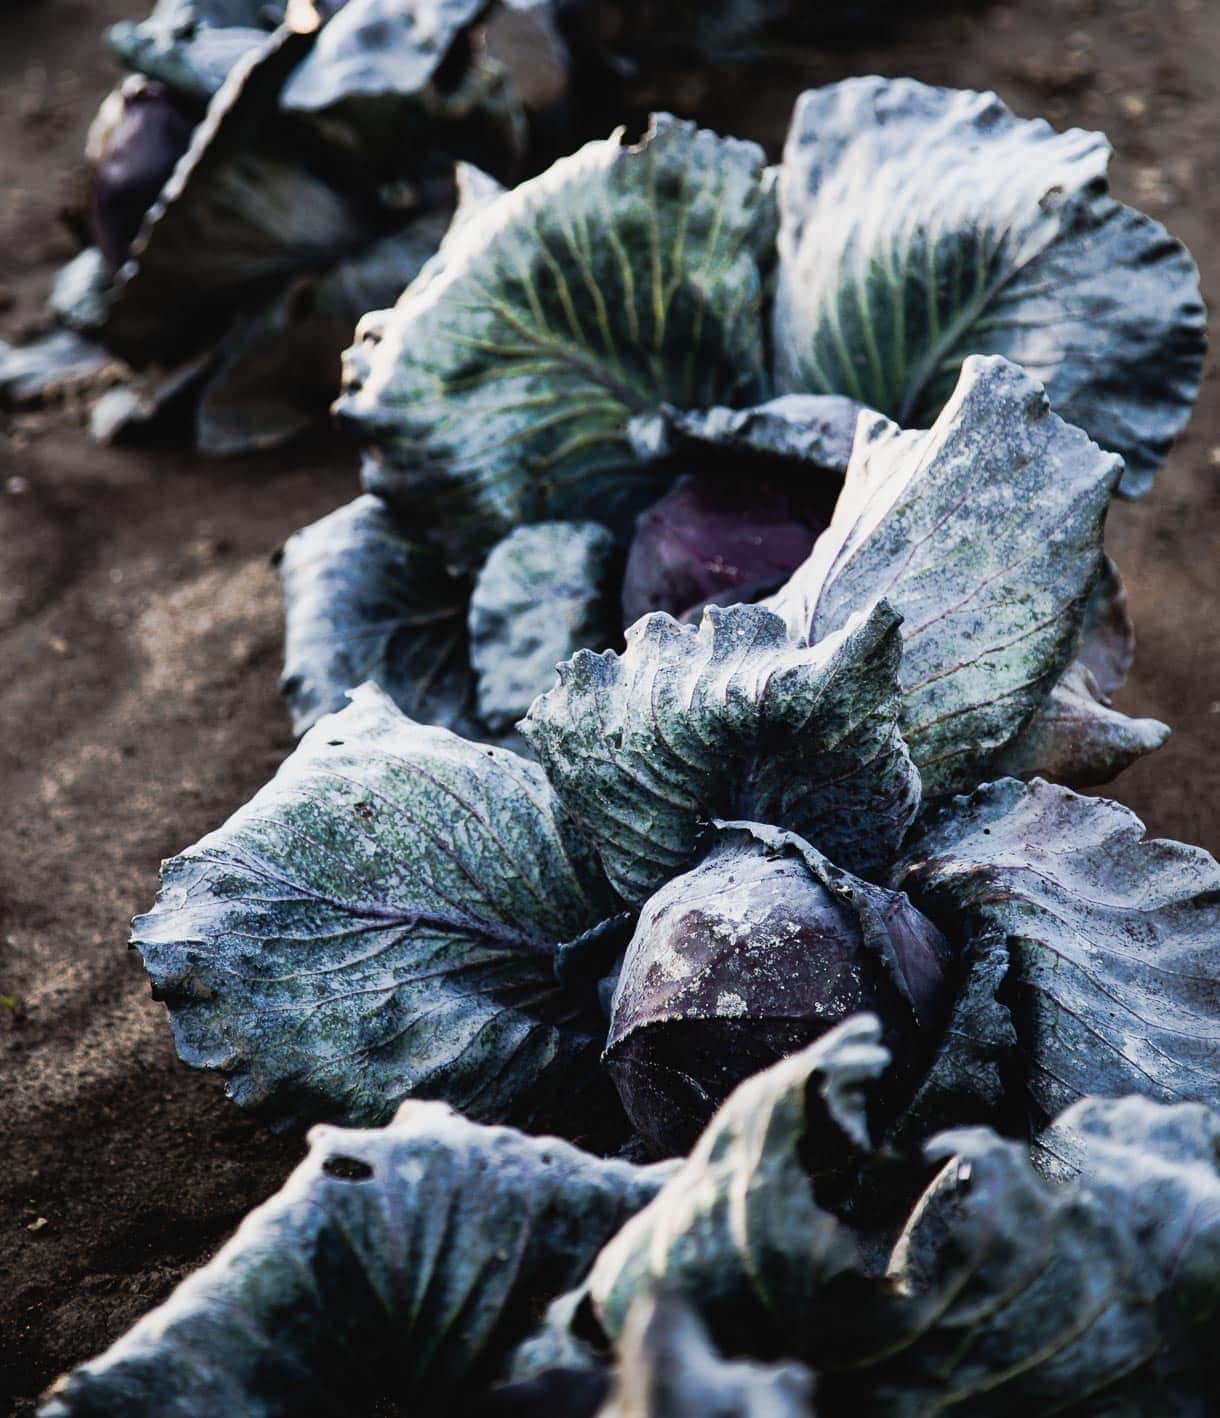 Purple cabbage growing